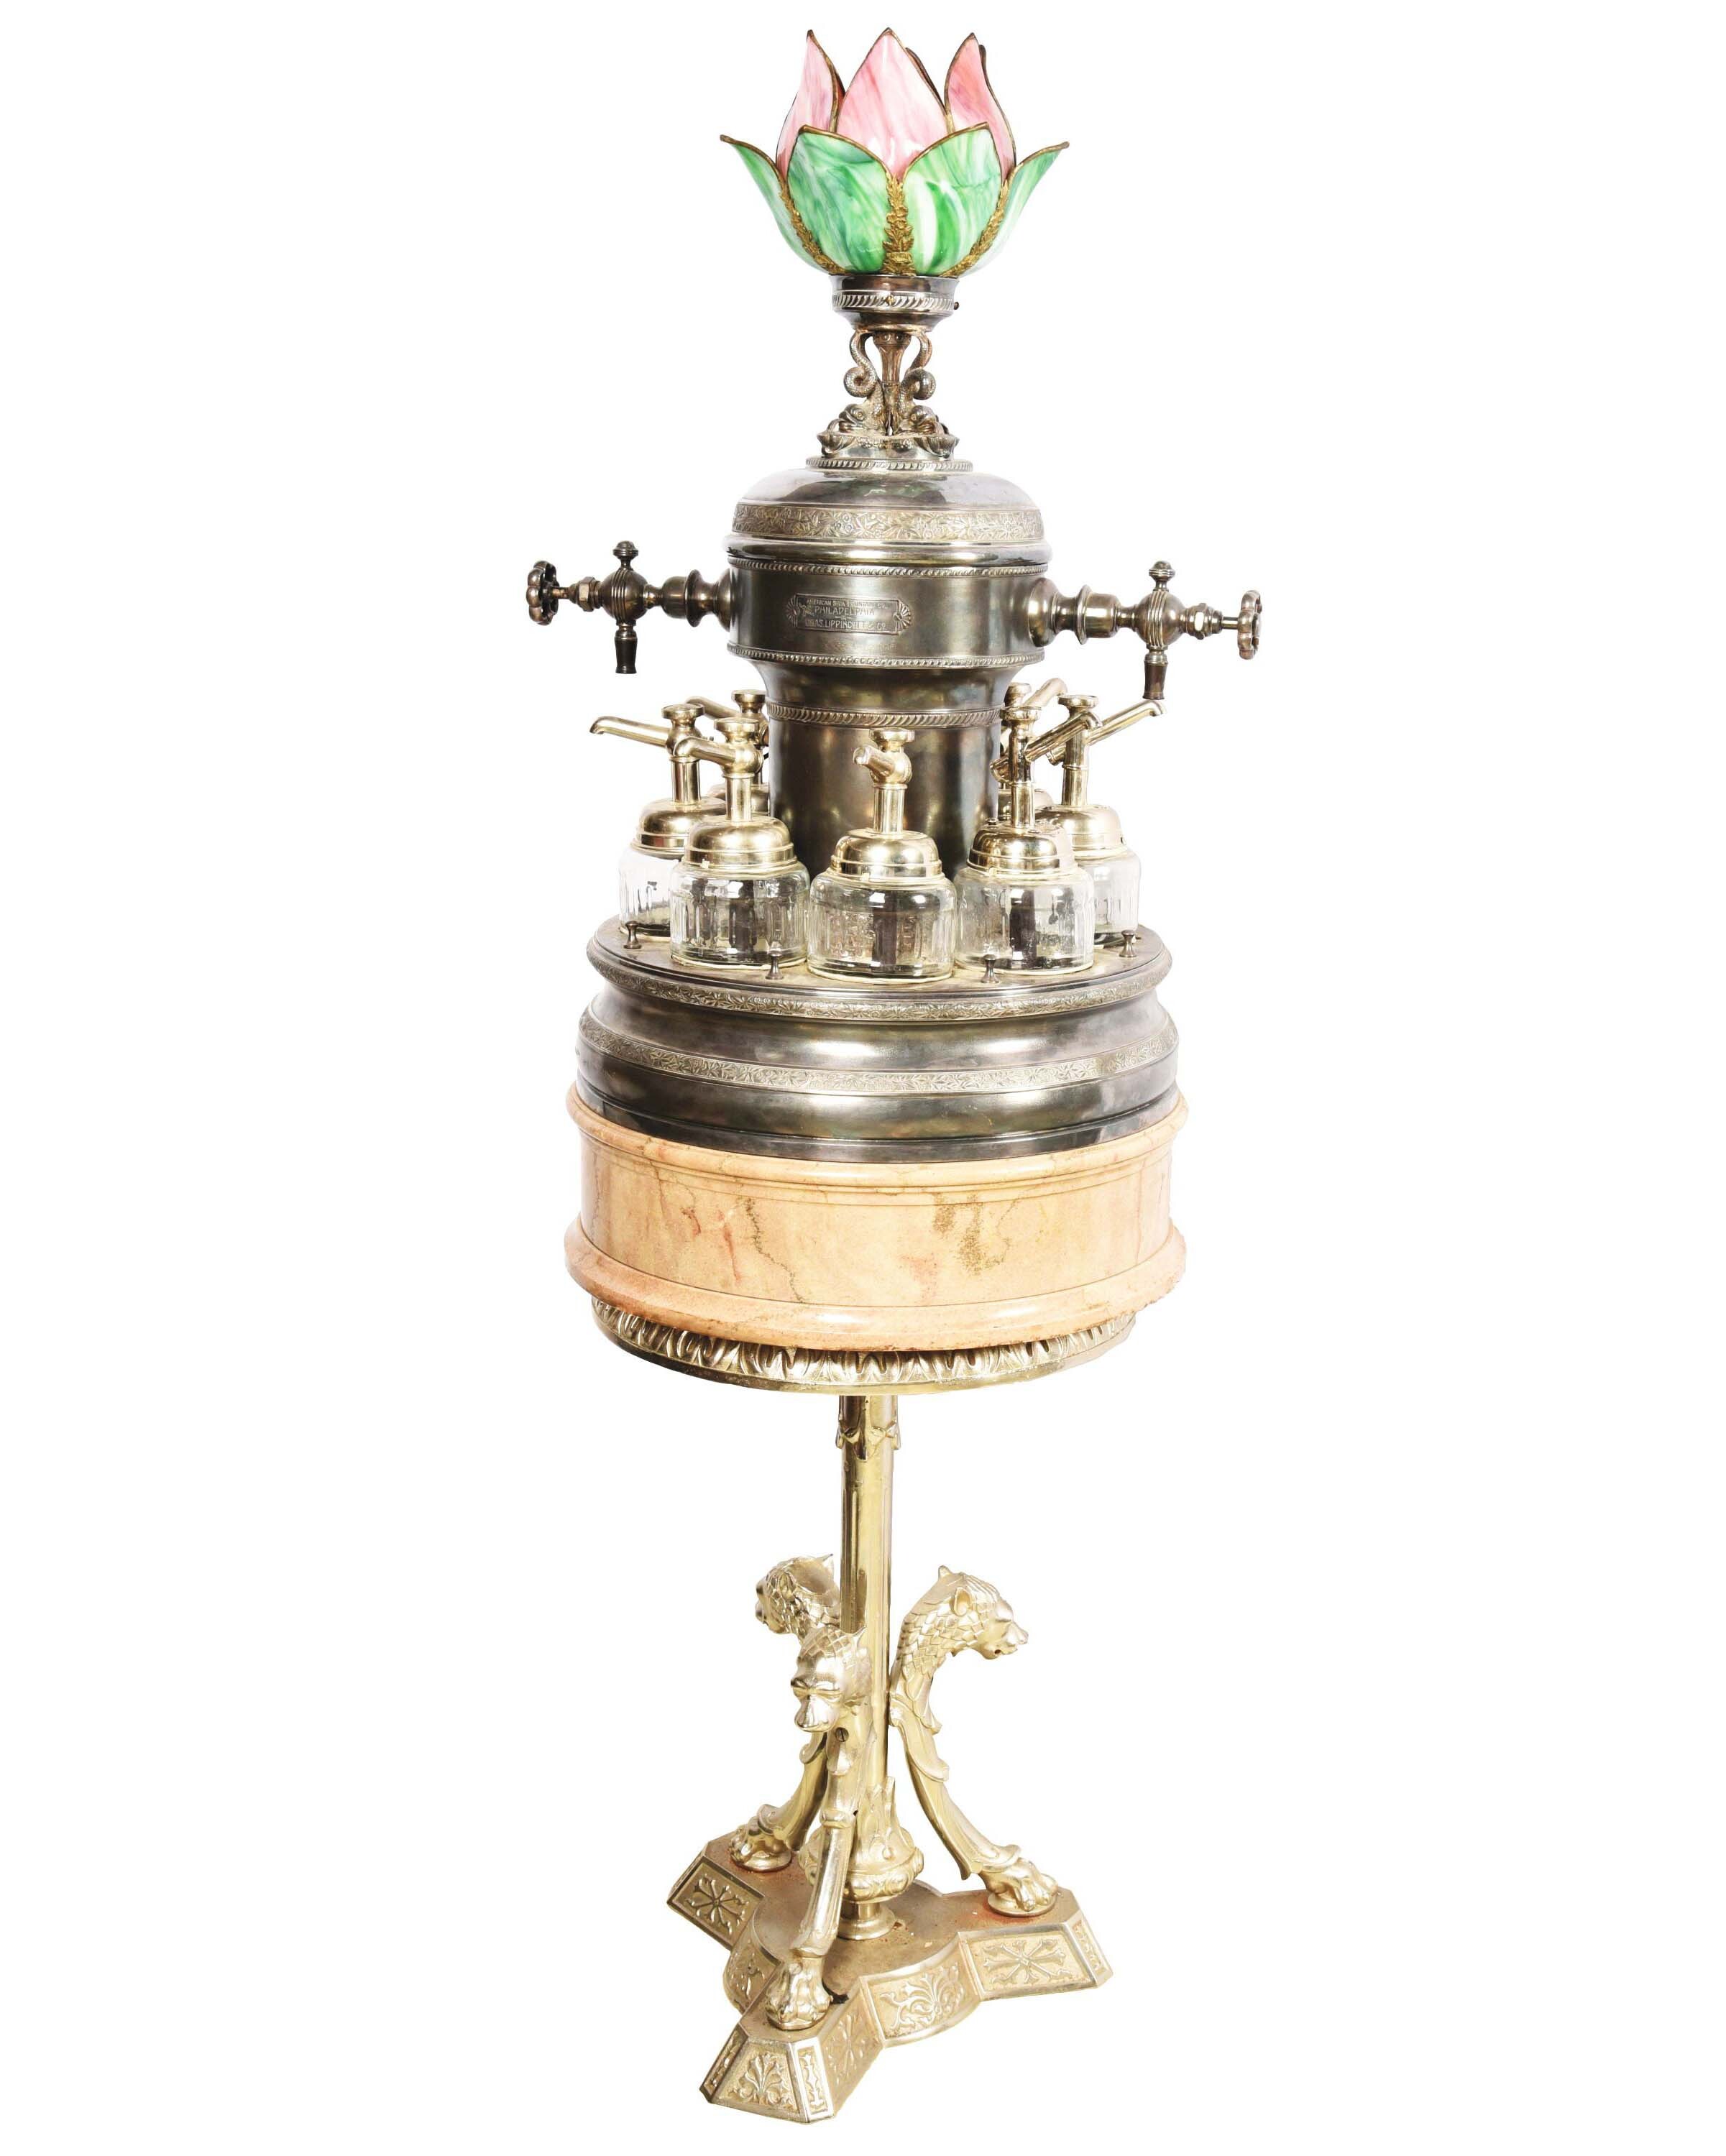 Soda fountain syrup dispenser made around the turn of the 20th century by American Soda Fountain Co., Philadelphia. Original double tap with six original glass fountain flavor dispensers. Lighted leaded-glass tulip-form finial. Estimate $3,000-$6,000